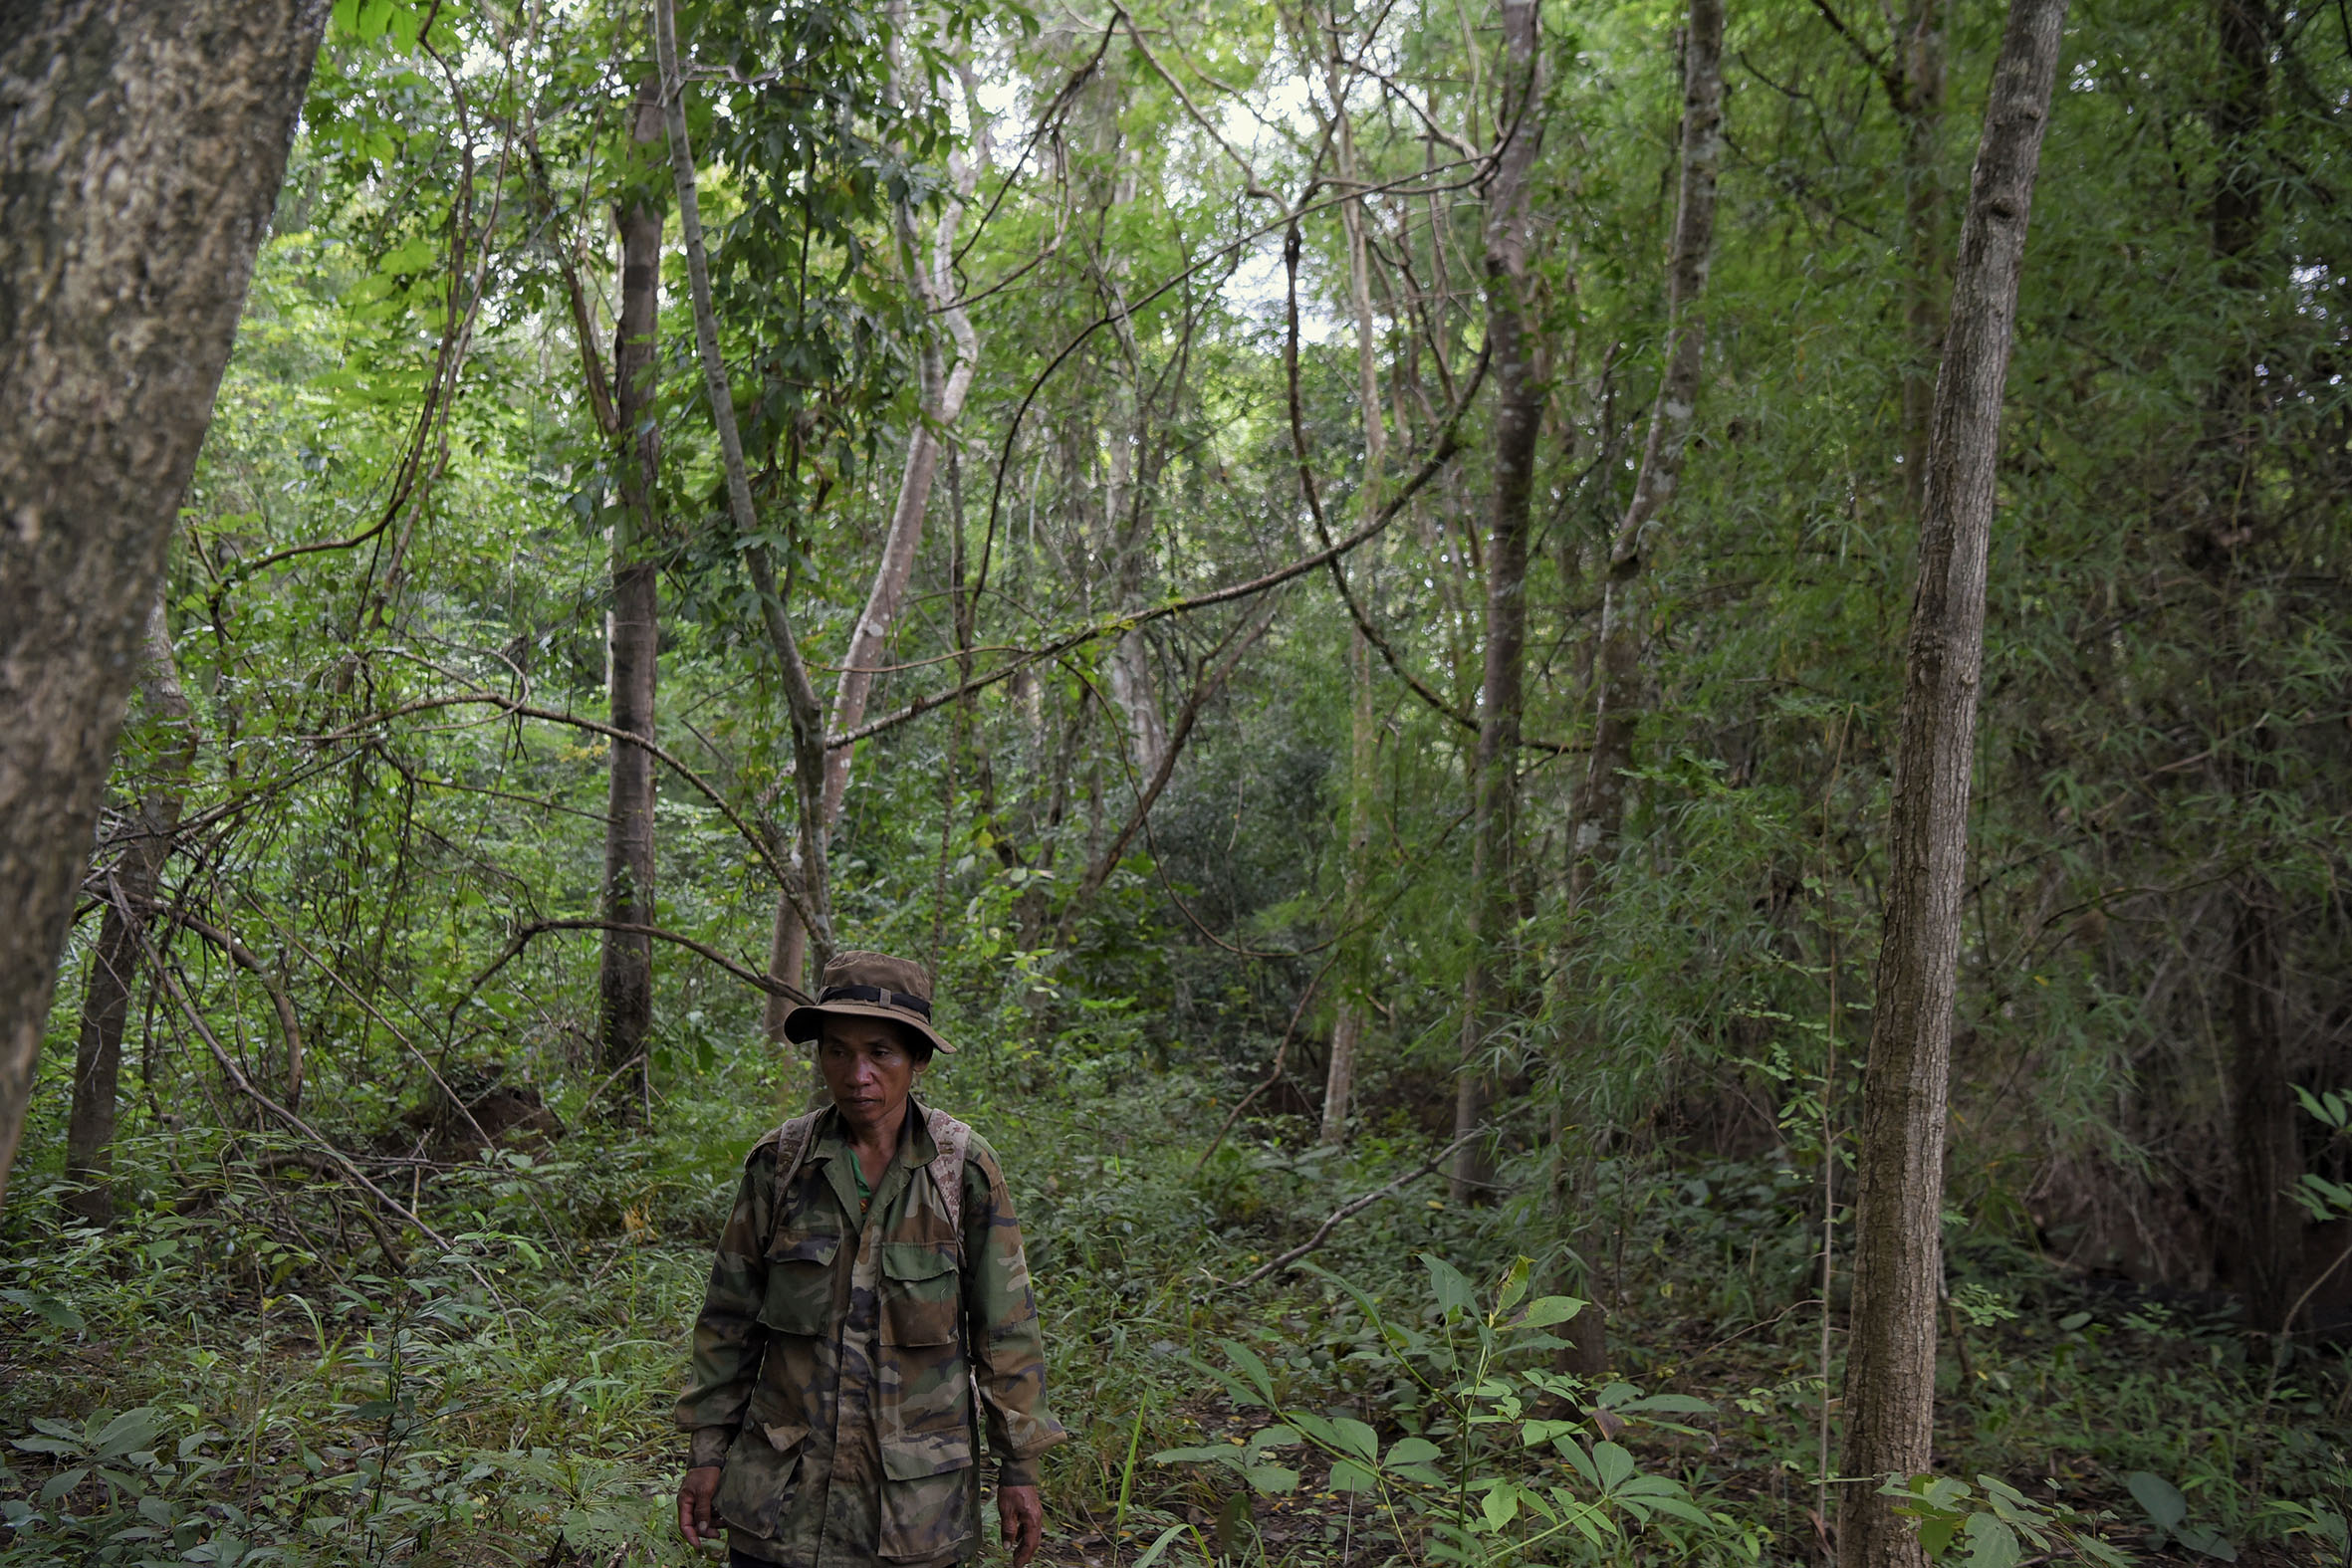 Mr Sok Lolo, a Cambodian ranger, on a snare patrol in Cambodia’s Phnom Tnout Wildlife Sanctuary. ST PHOTO: MARK CHEONG